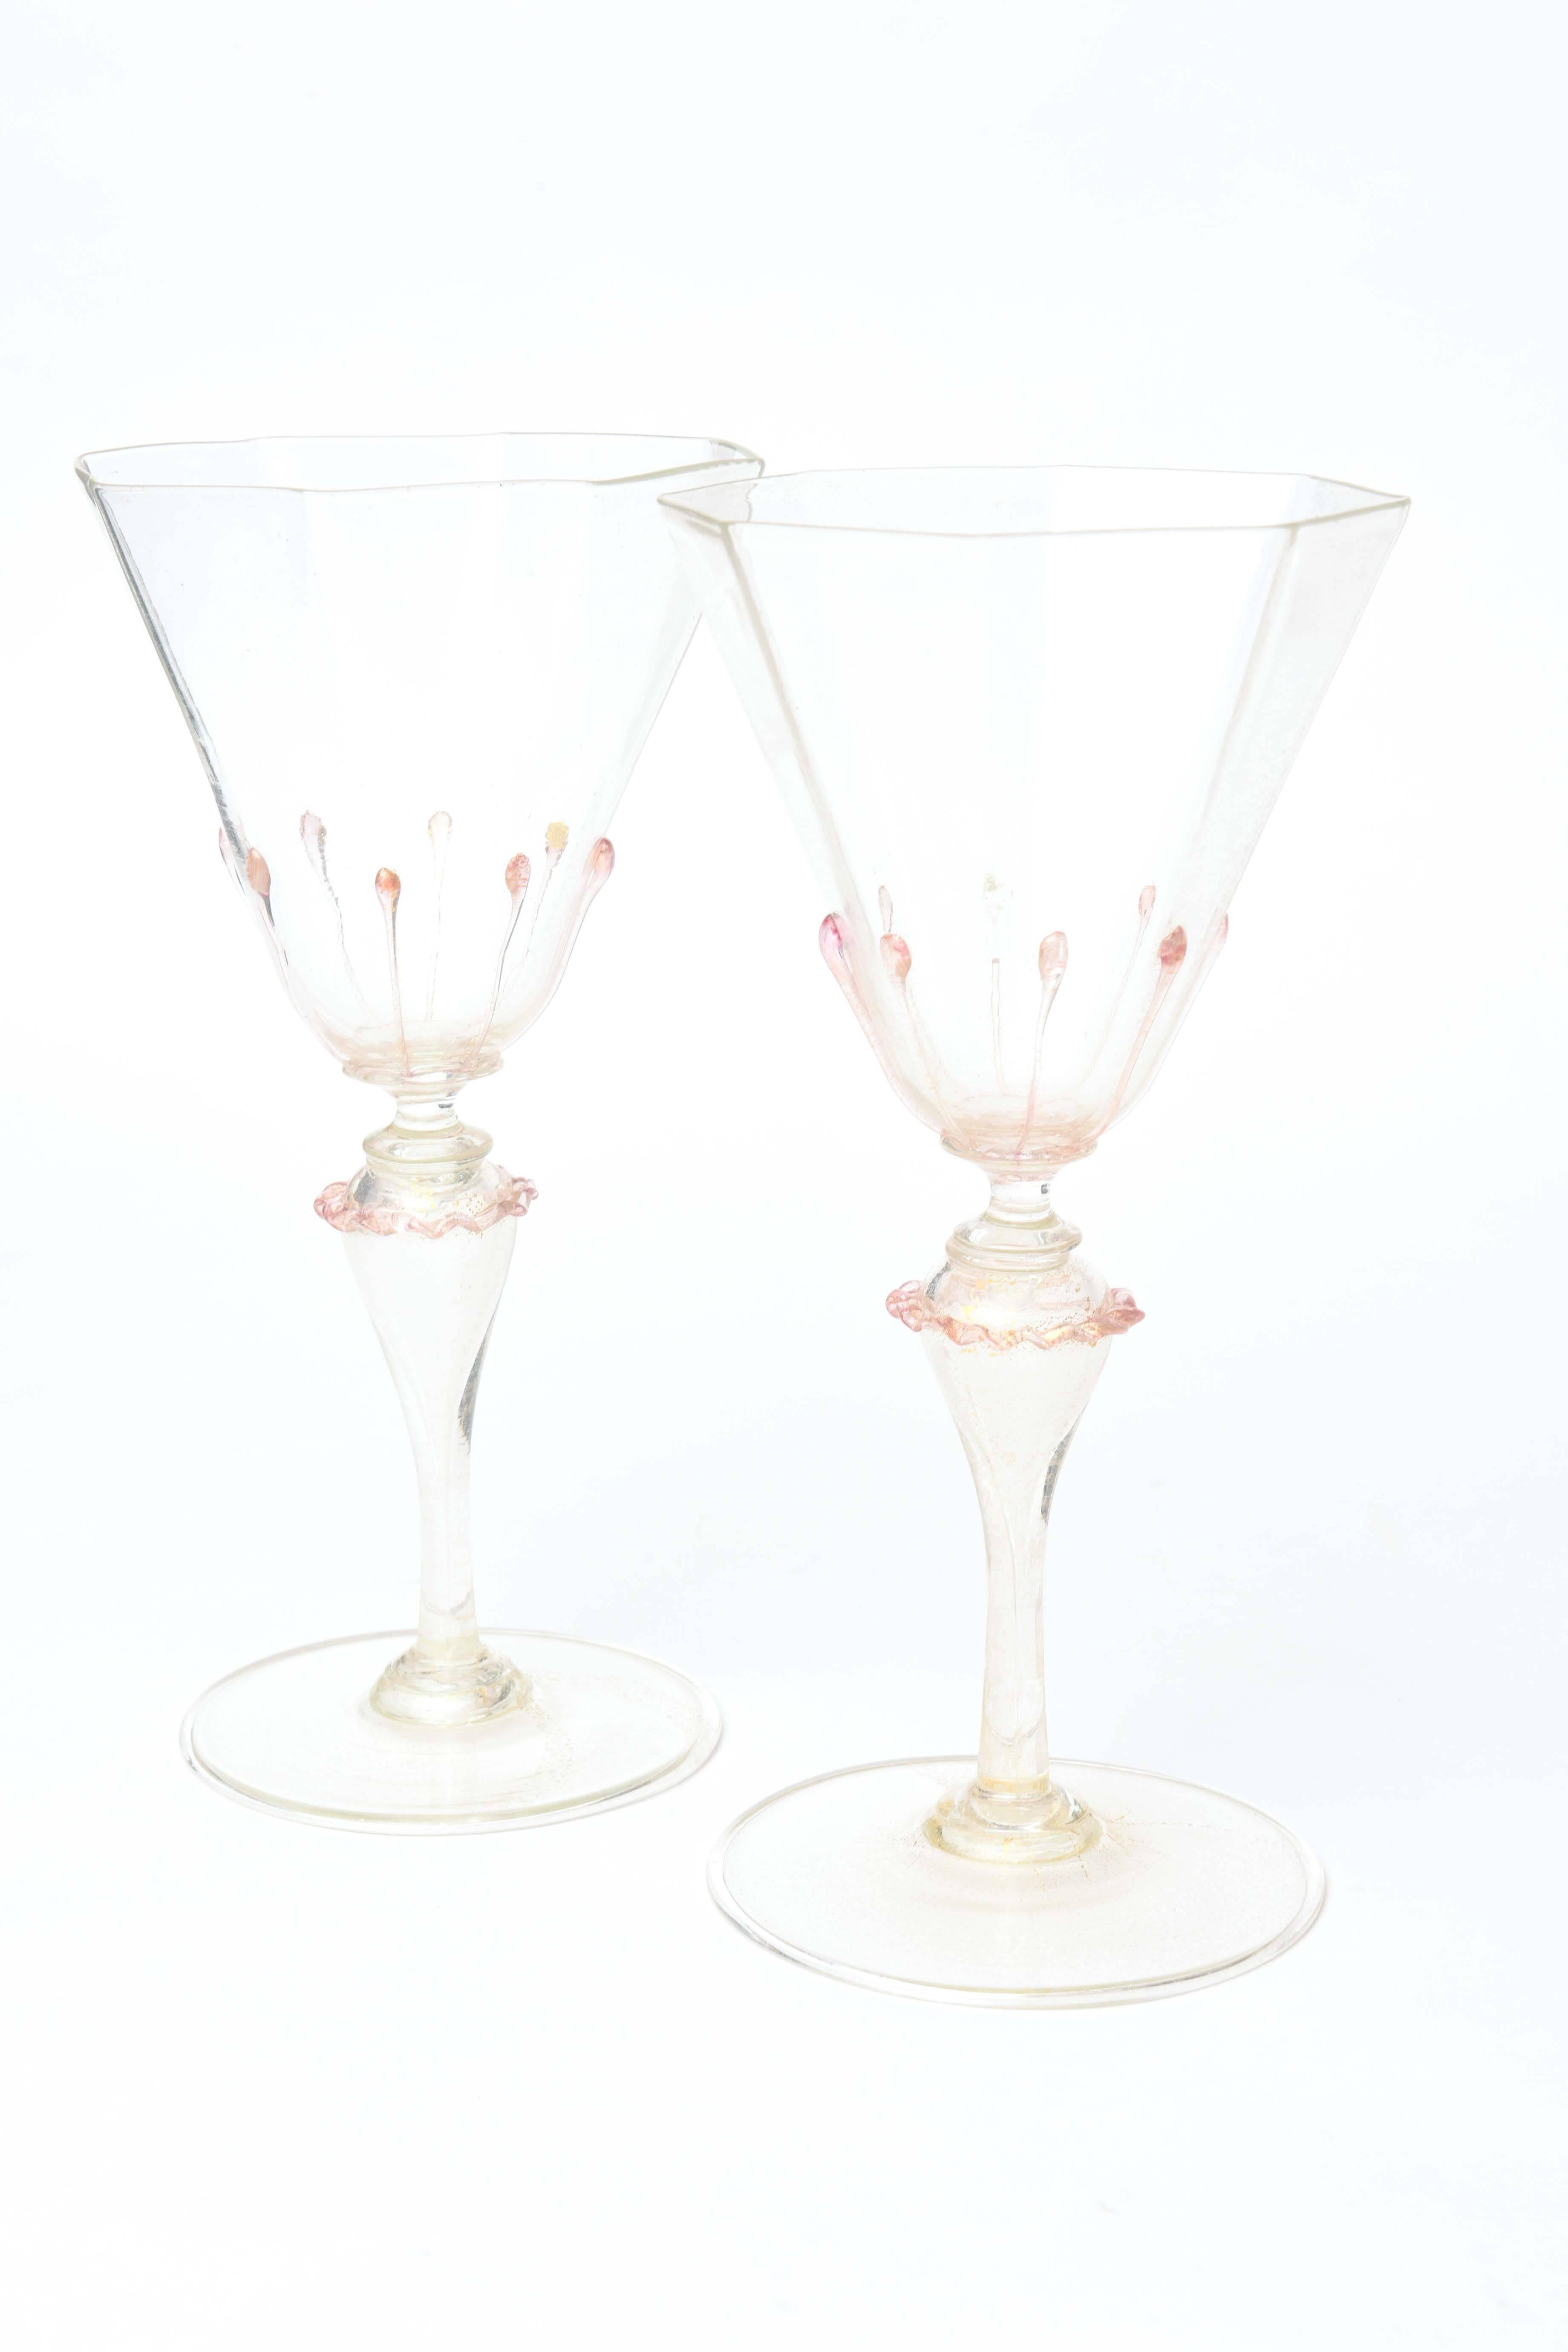 Italian Exquisite Set of Ten Venetian Goblets, Pink & Gilt with Extra Applied Decoration